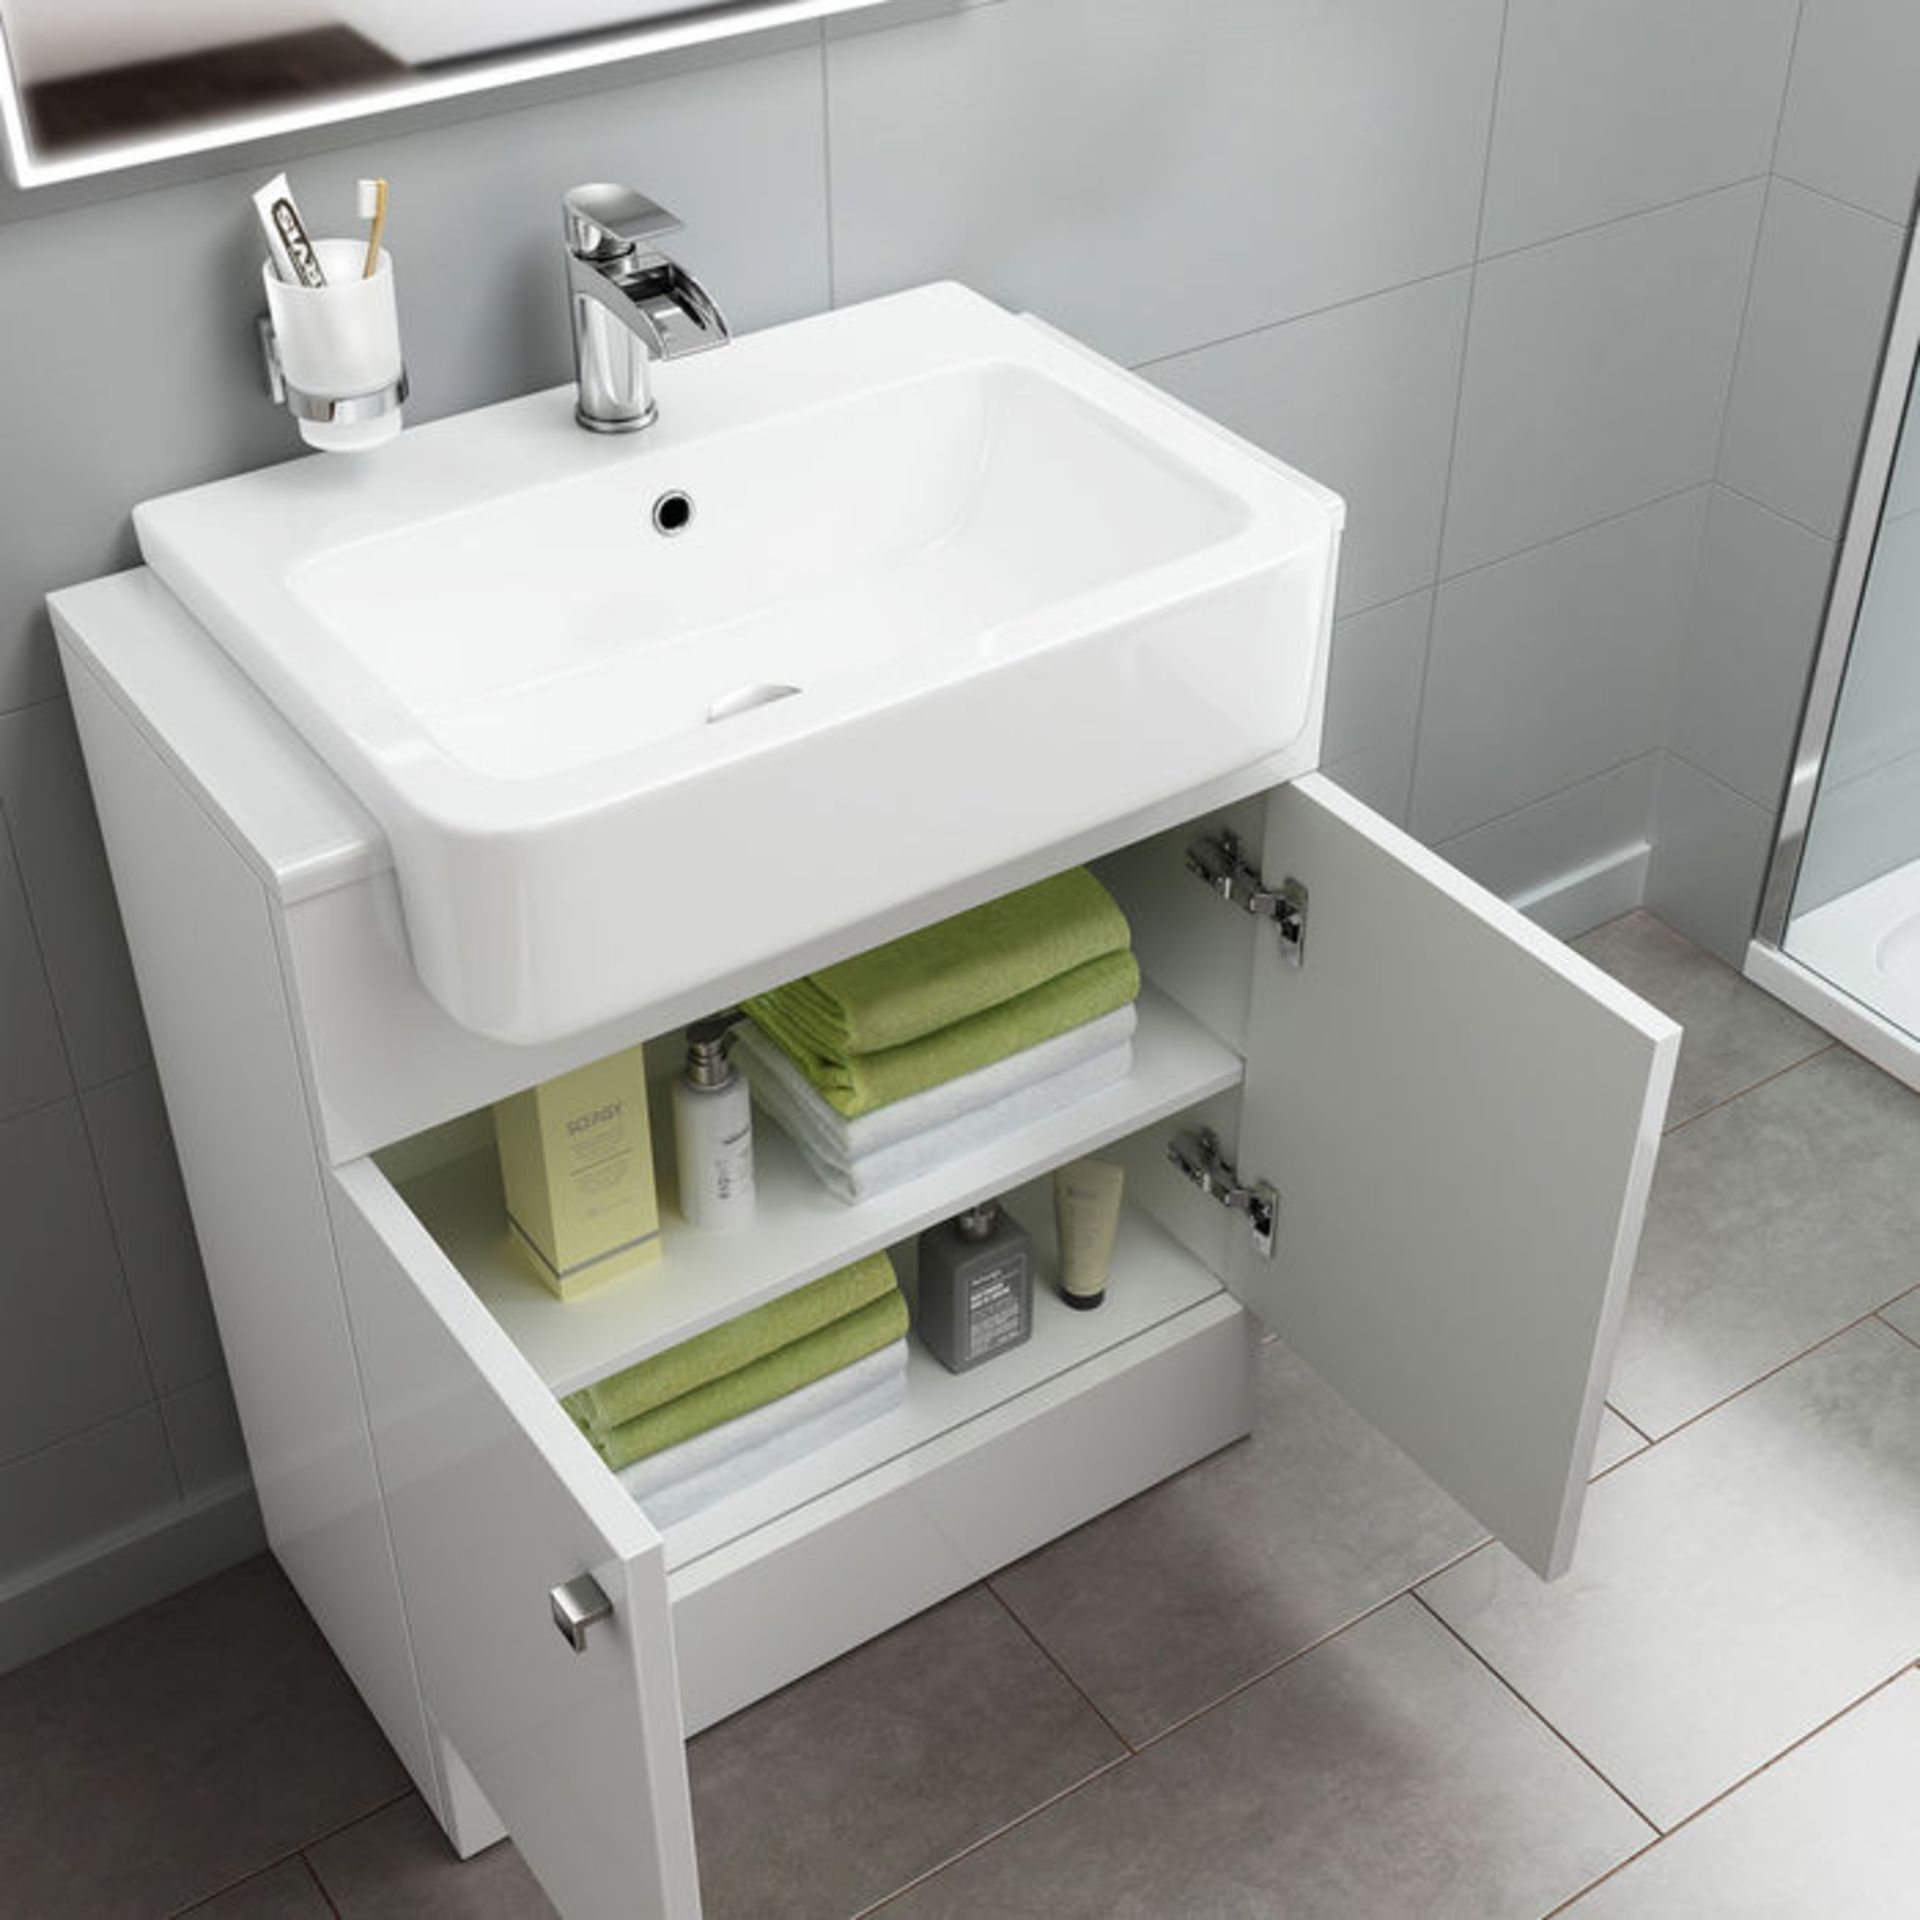 (P272) 660mm Harper Gloss White Basin Vanity Unit - Floor Standing. RRP £499.99. Comes complete with - Image 2 of 4